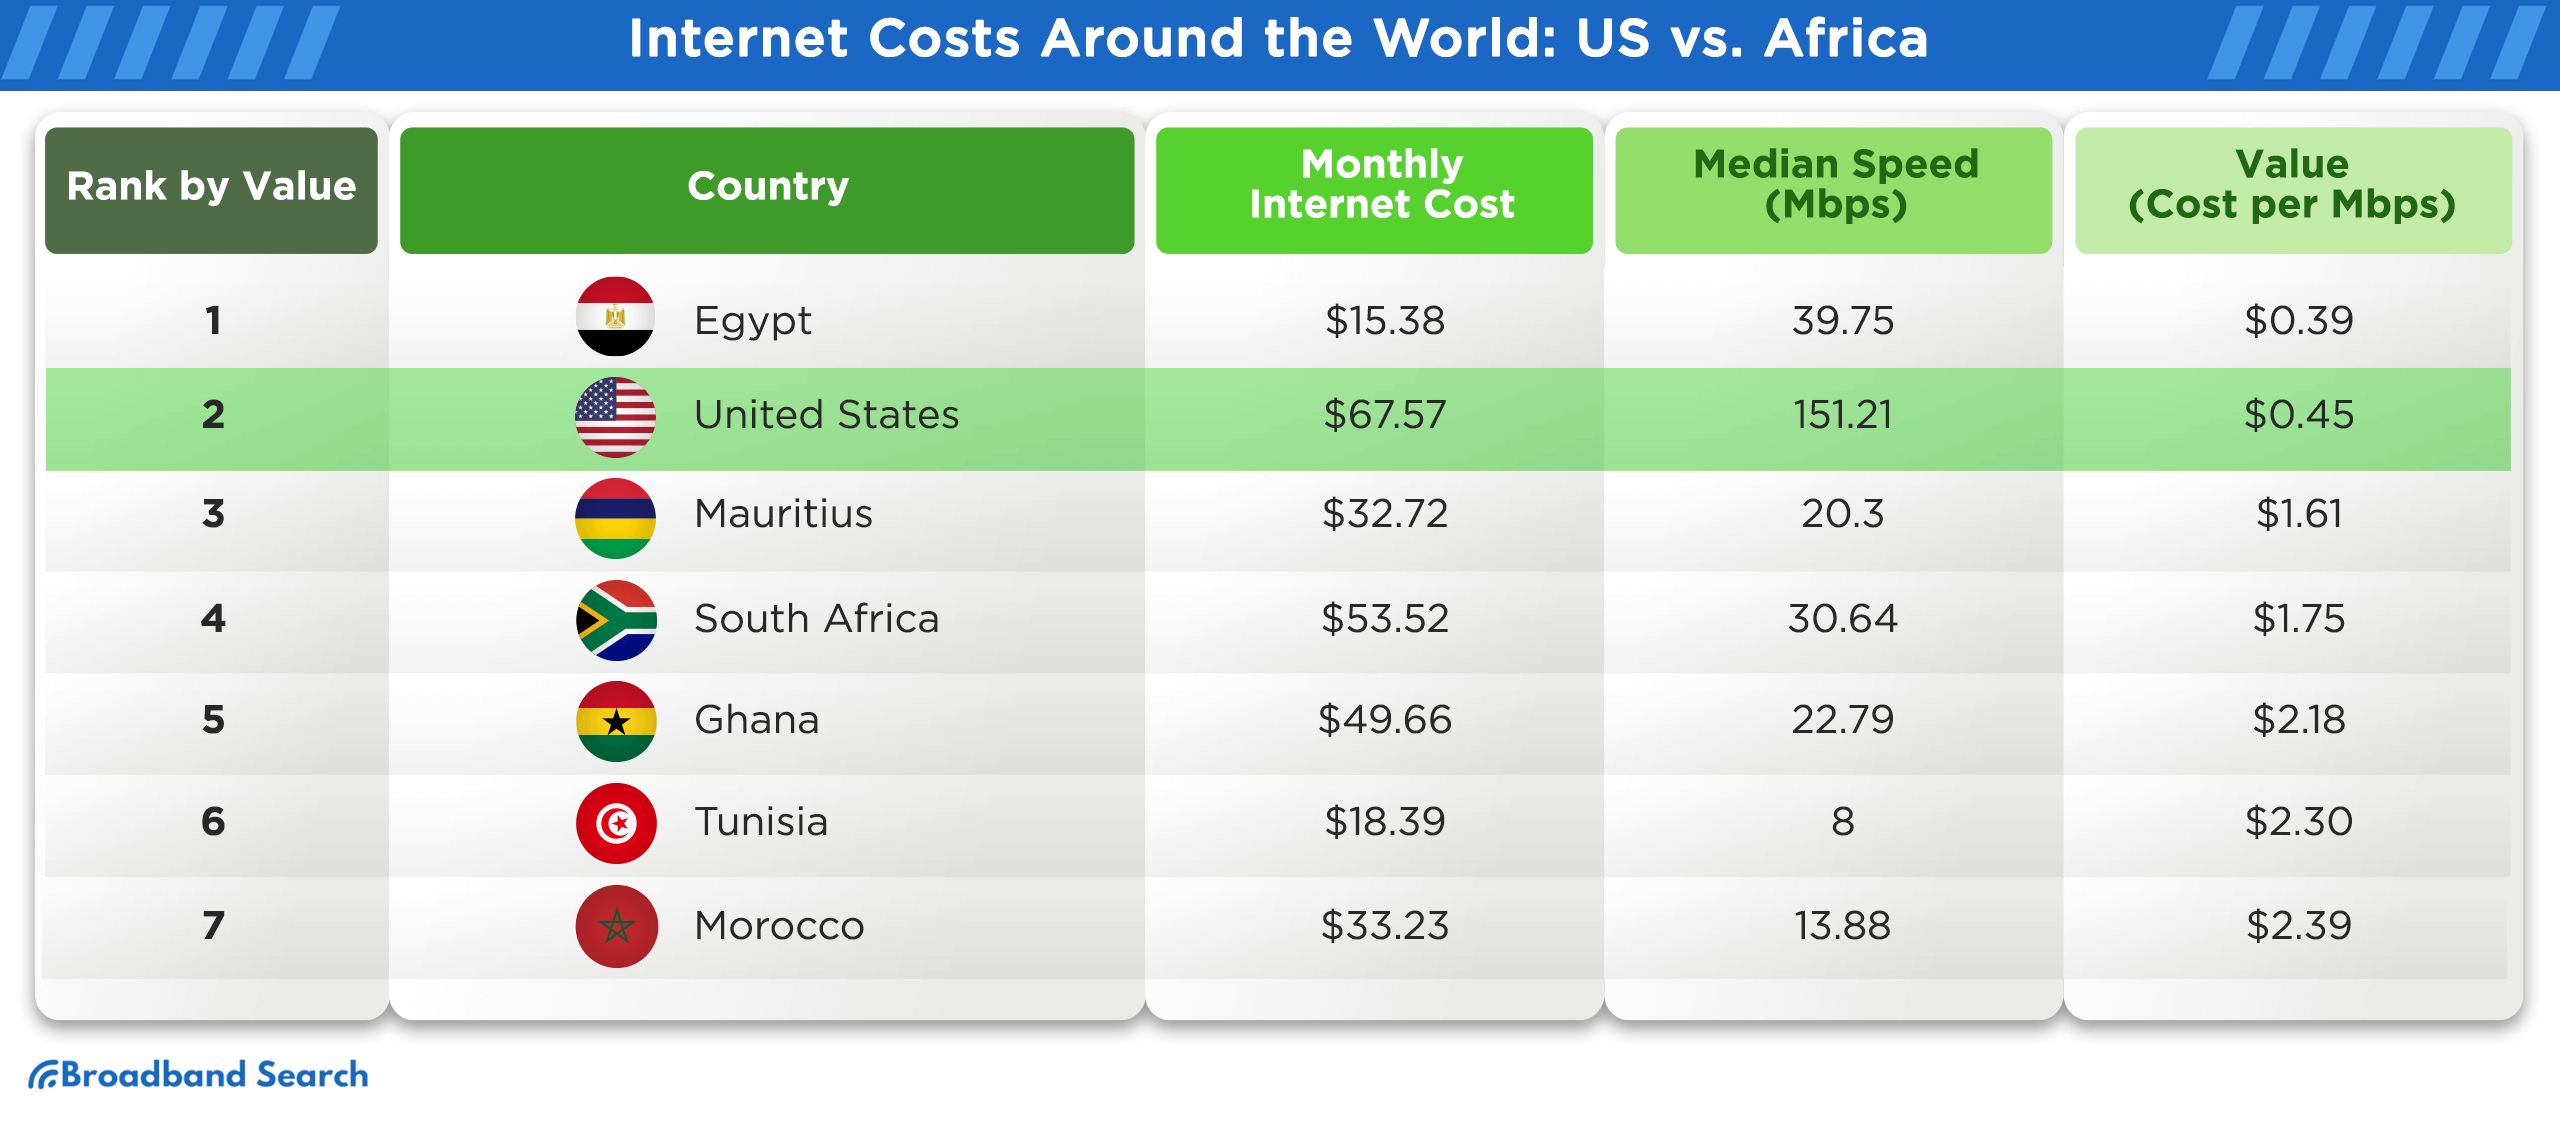 Comparison of internet costs between the US and countries located in Africa